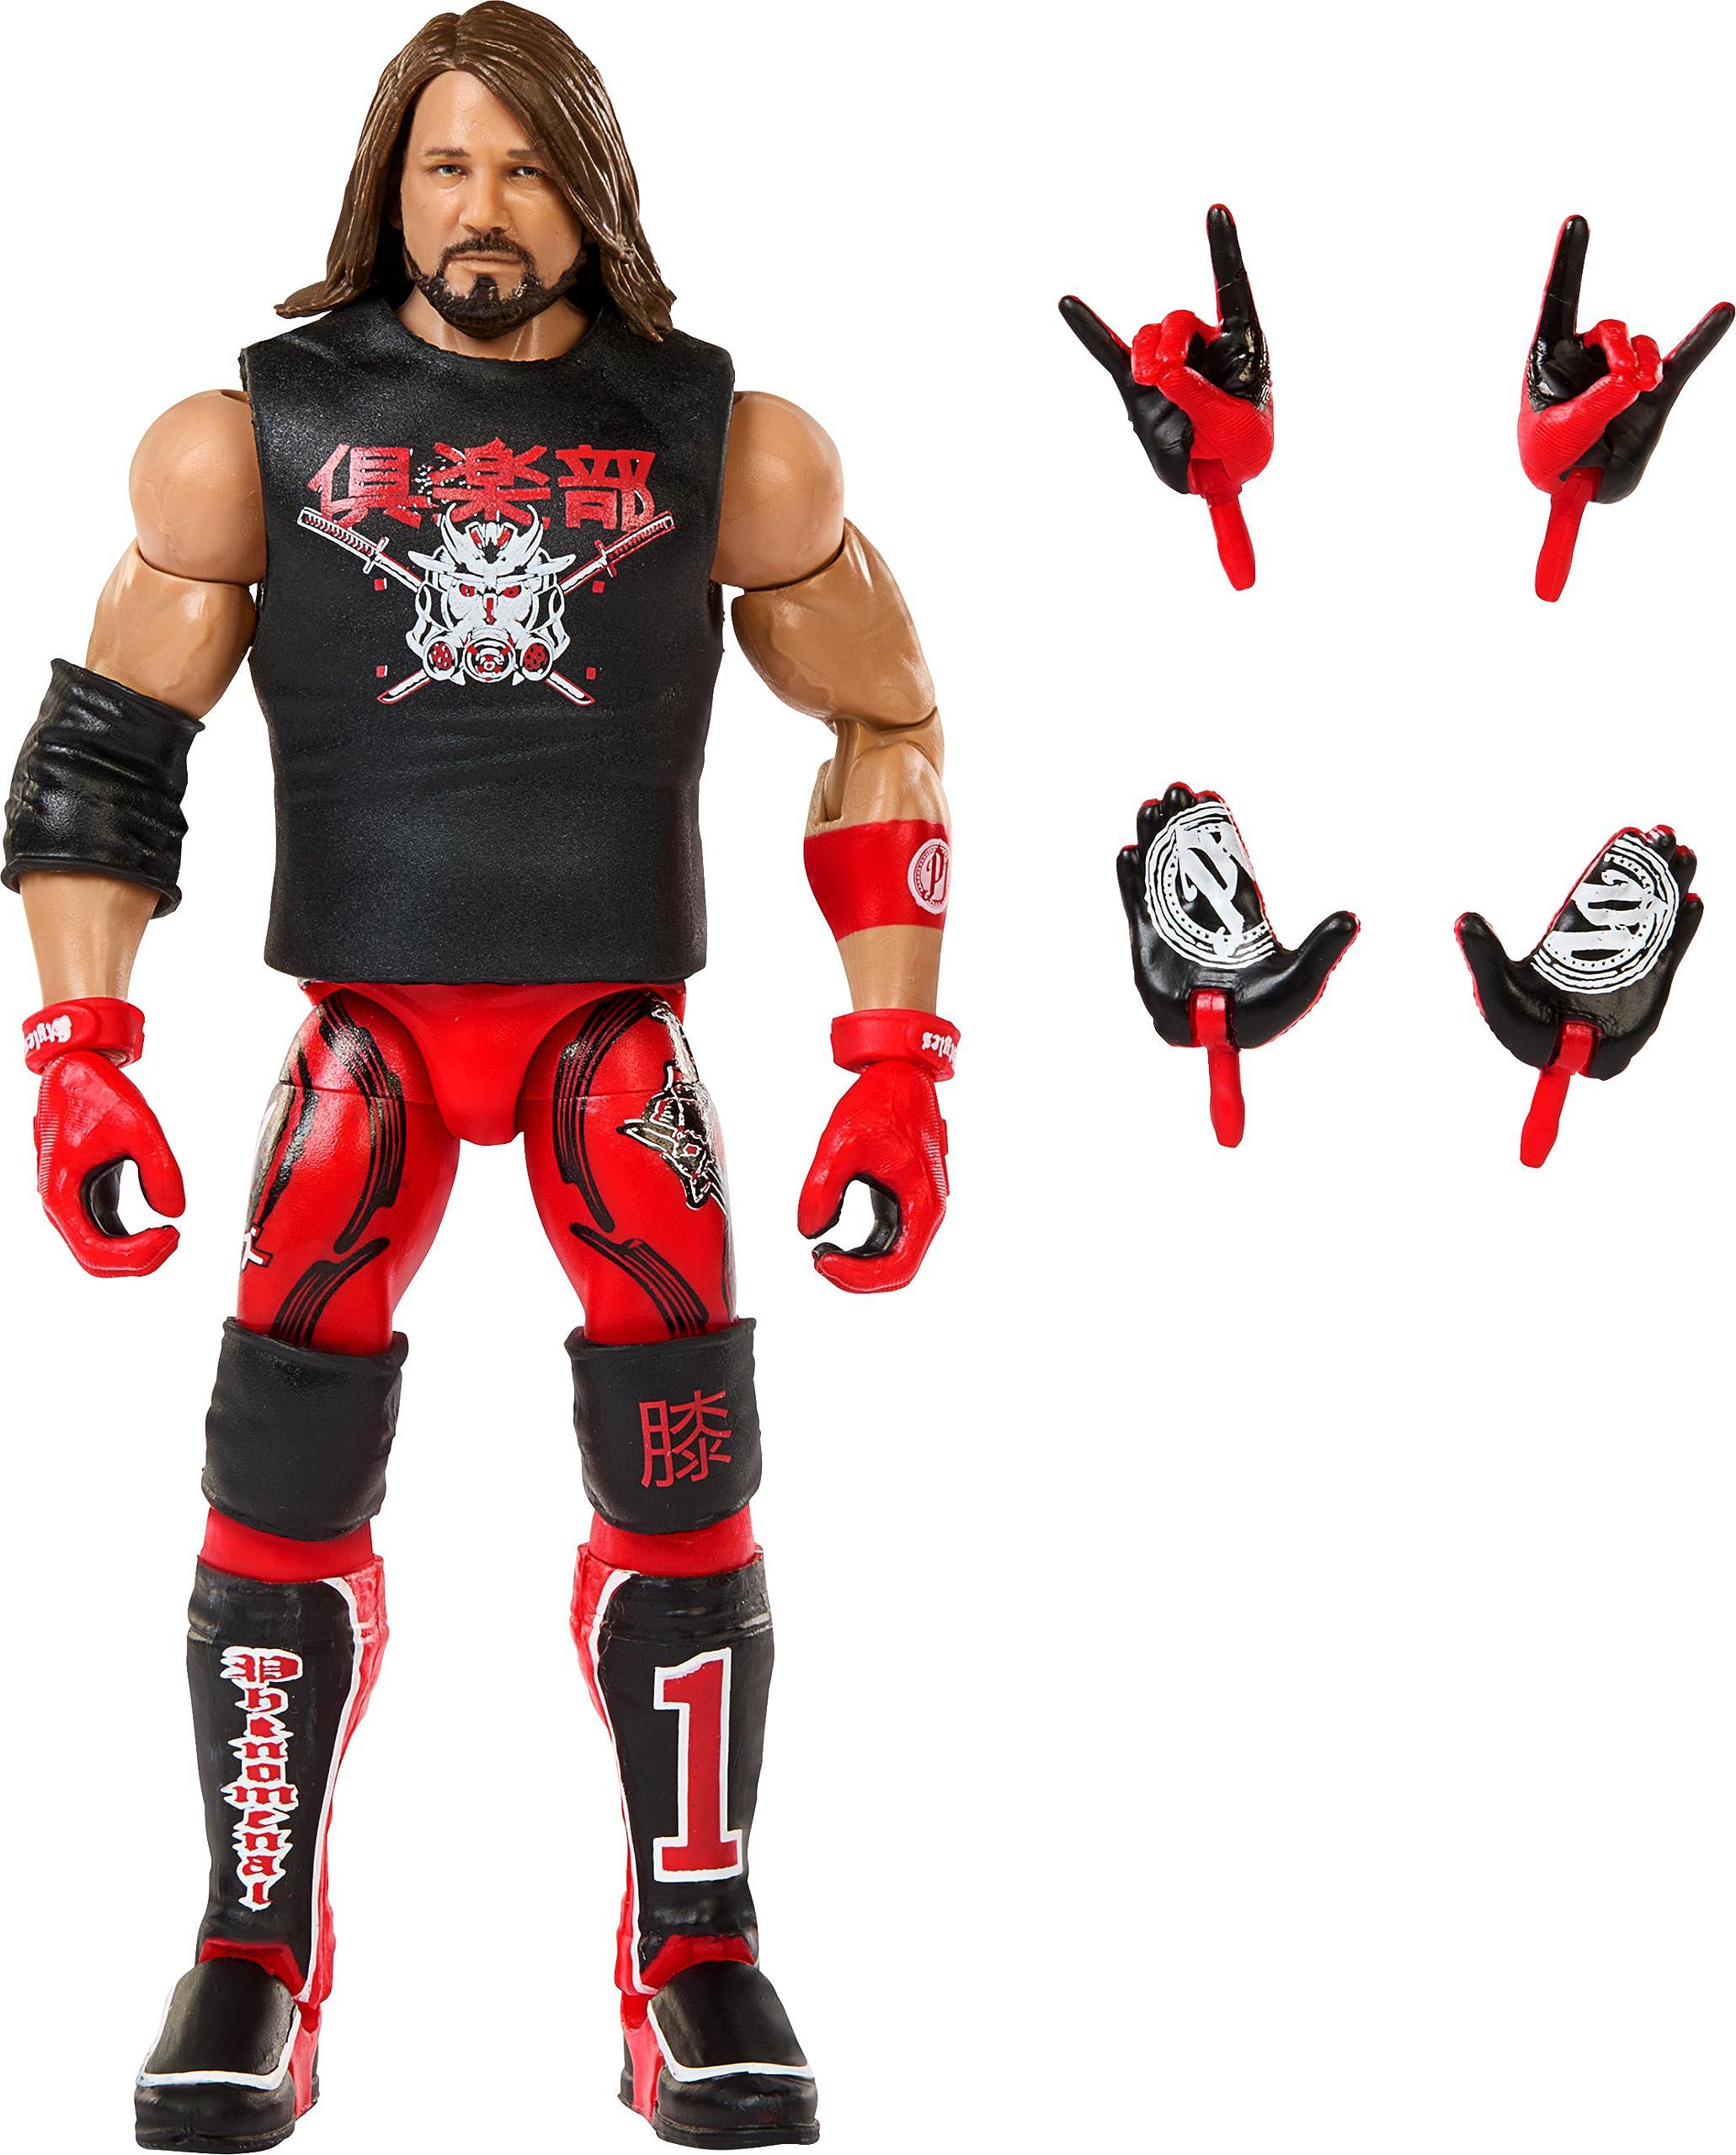 wwe mattel aj styles elite collection action figure with accessories, articulation & life-like detail, collectible toy, 6-inc